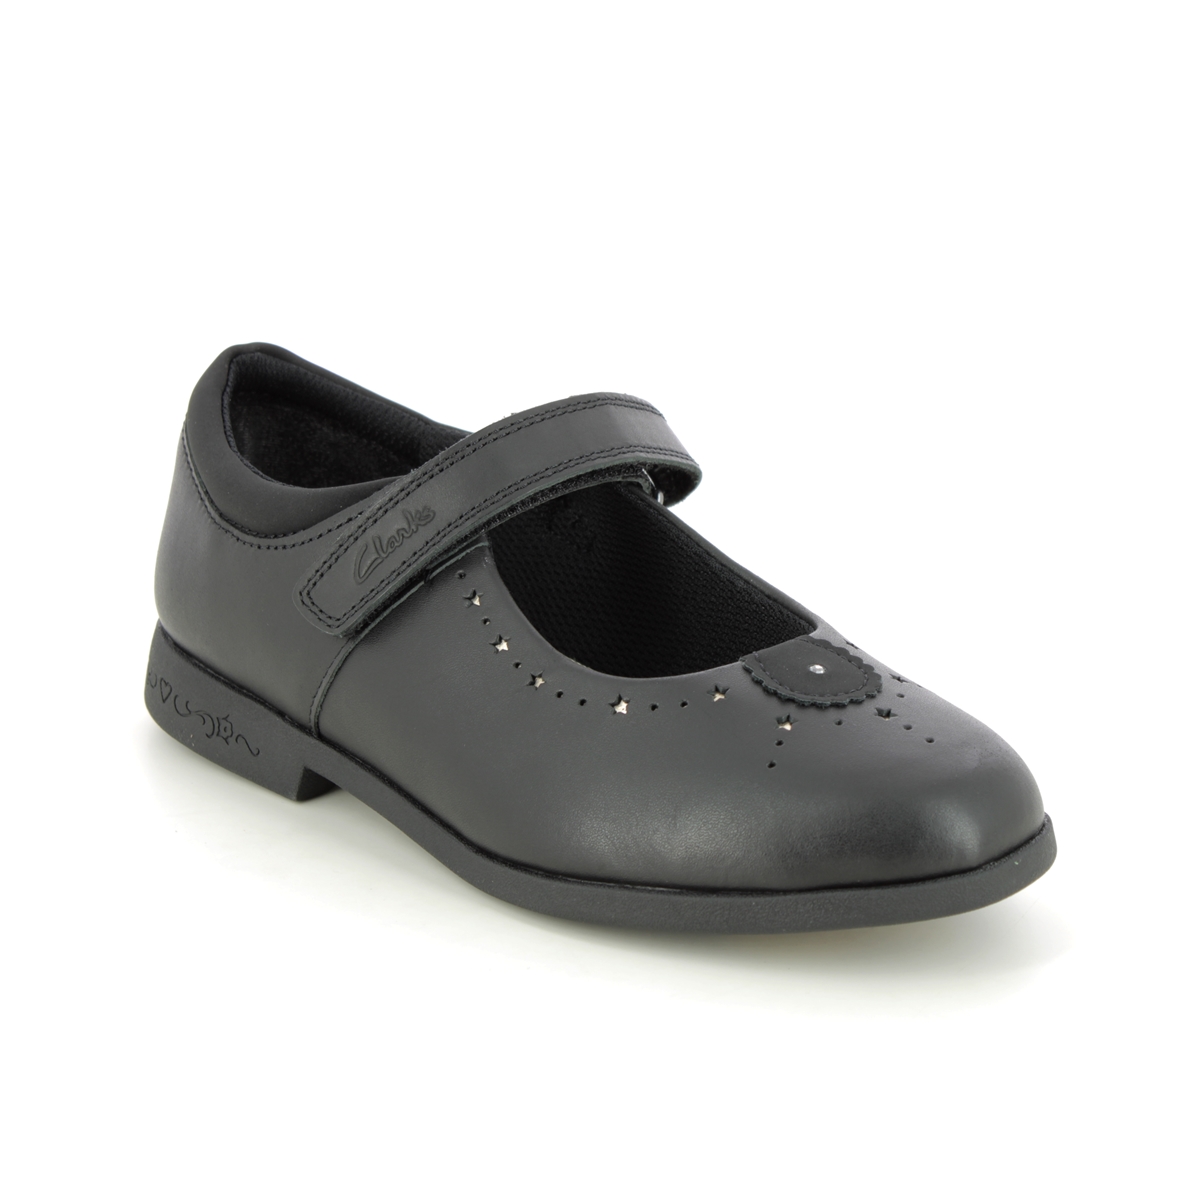 Clarks Magic Step Mj O Black Leather Kids Girls School Shoes 697056F In Size 13.5 In Plain Black Leather F Width Fitting Regular Fit For School For ki